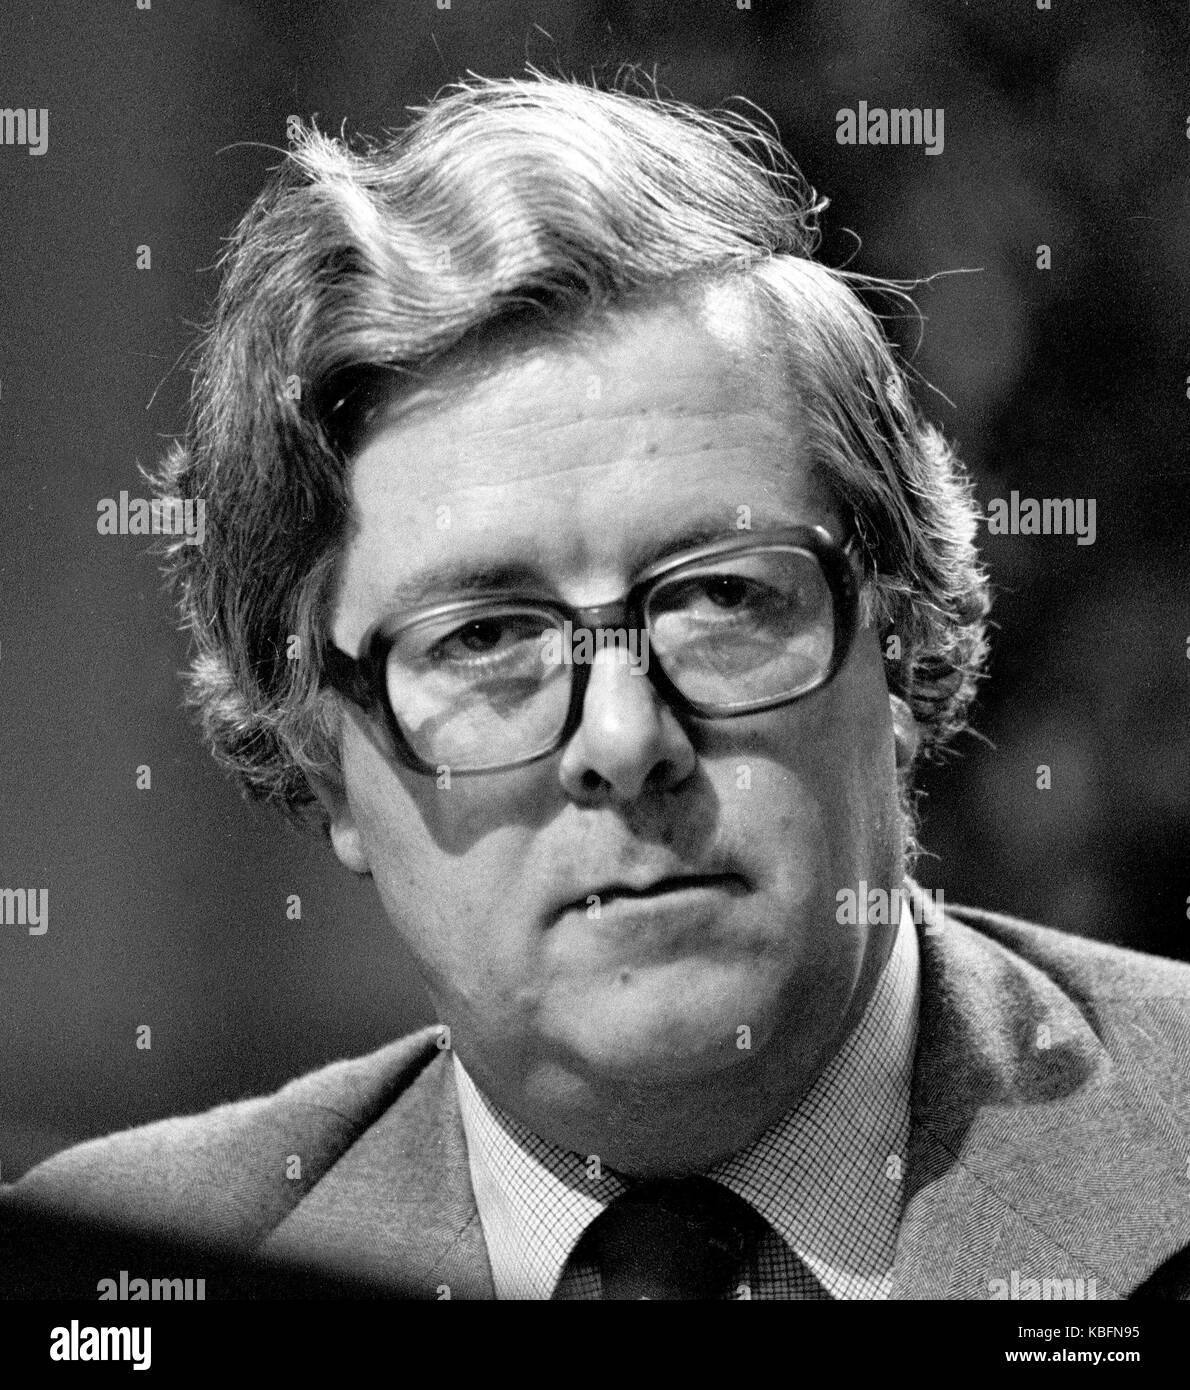 Richard Edward Geoffrey Howe, Baron Howe of Aberavon, CH, PC, QC, known from 1970 to 1992 as Sir Geoffrey Howe, was a British Conservative politician. Exclusive image David Cole - Press Portrait Service archives Stock Photo